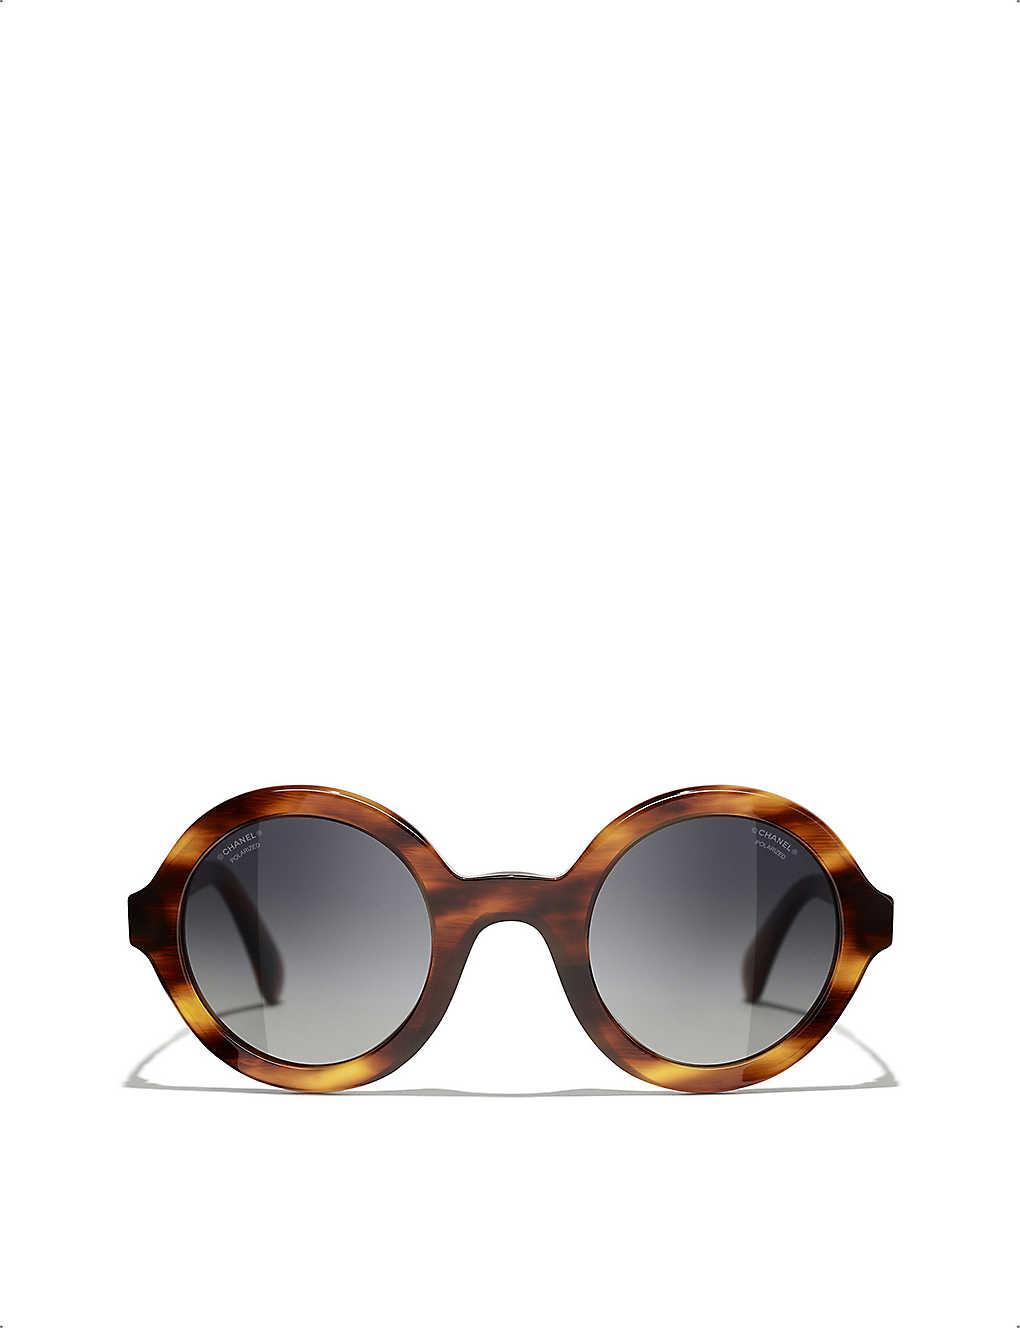 Chanel Round Sunglasses in Brown